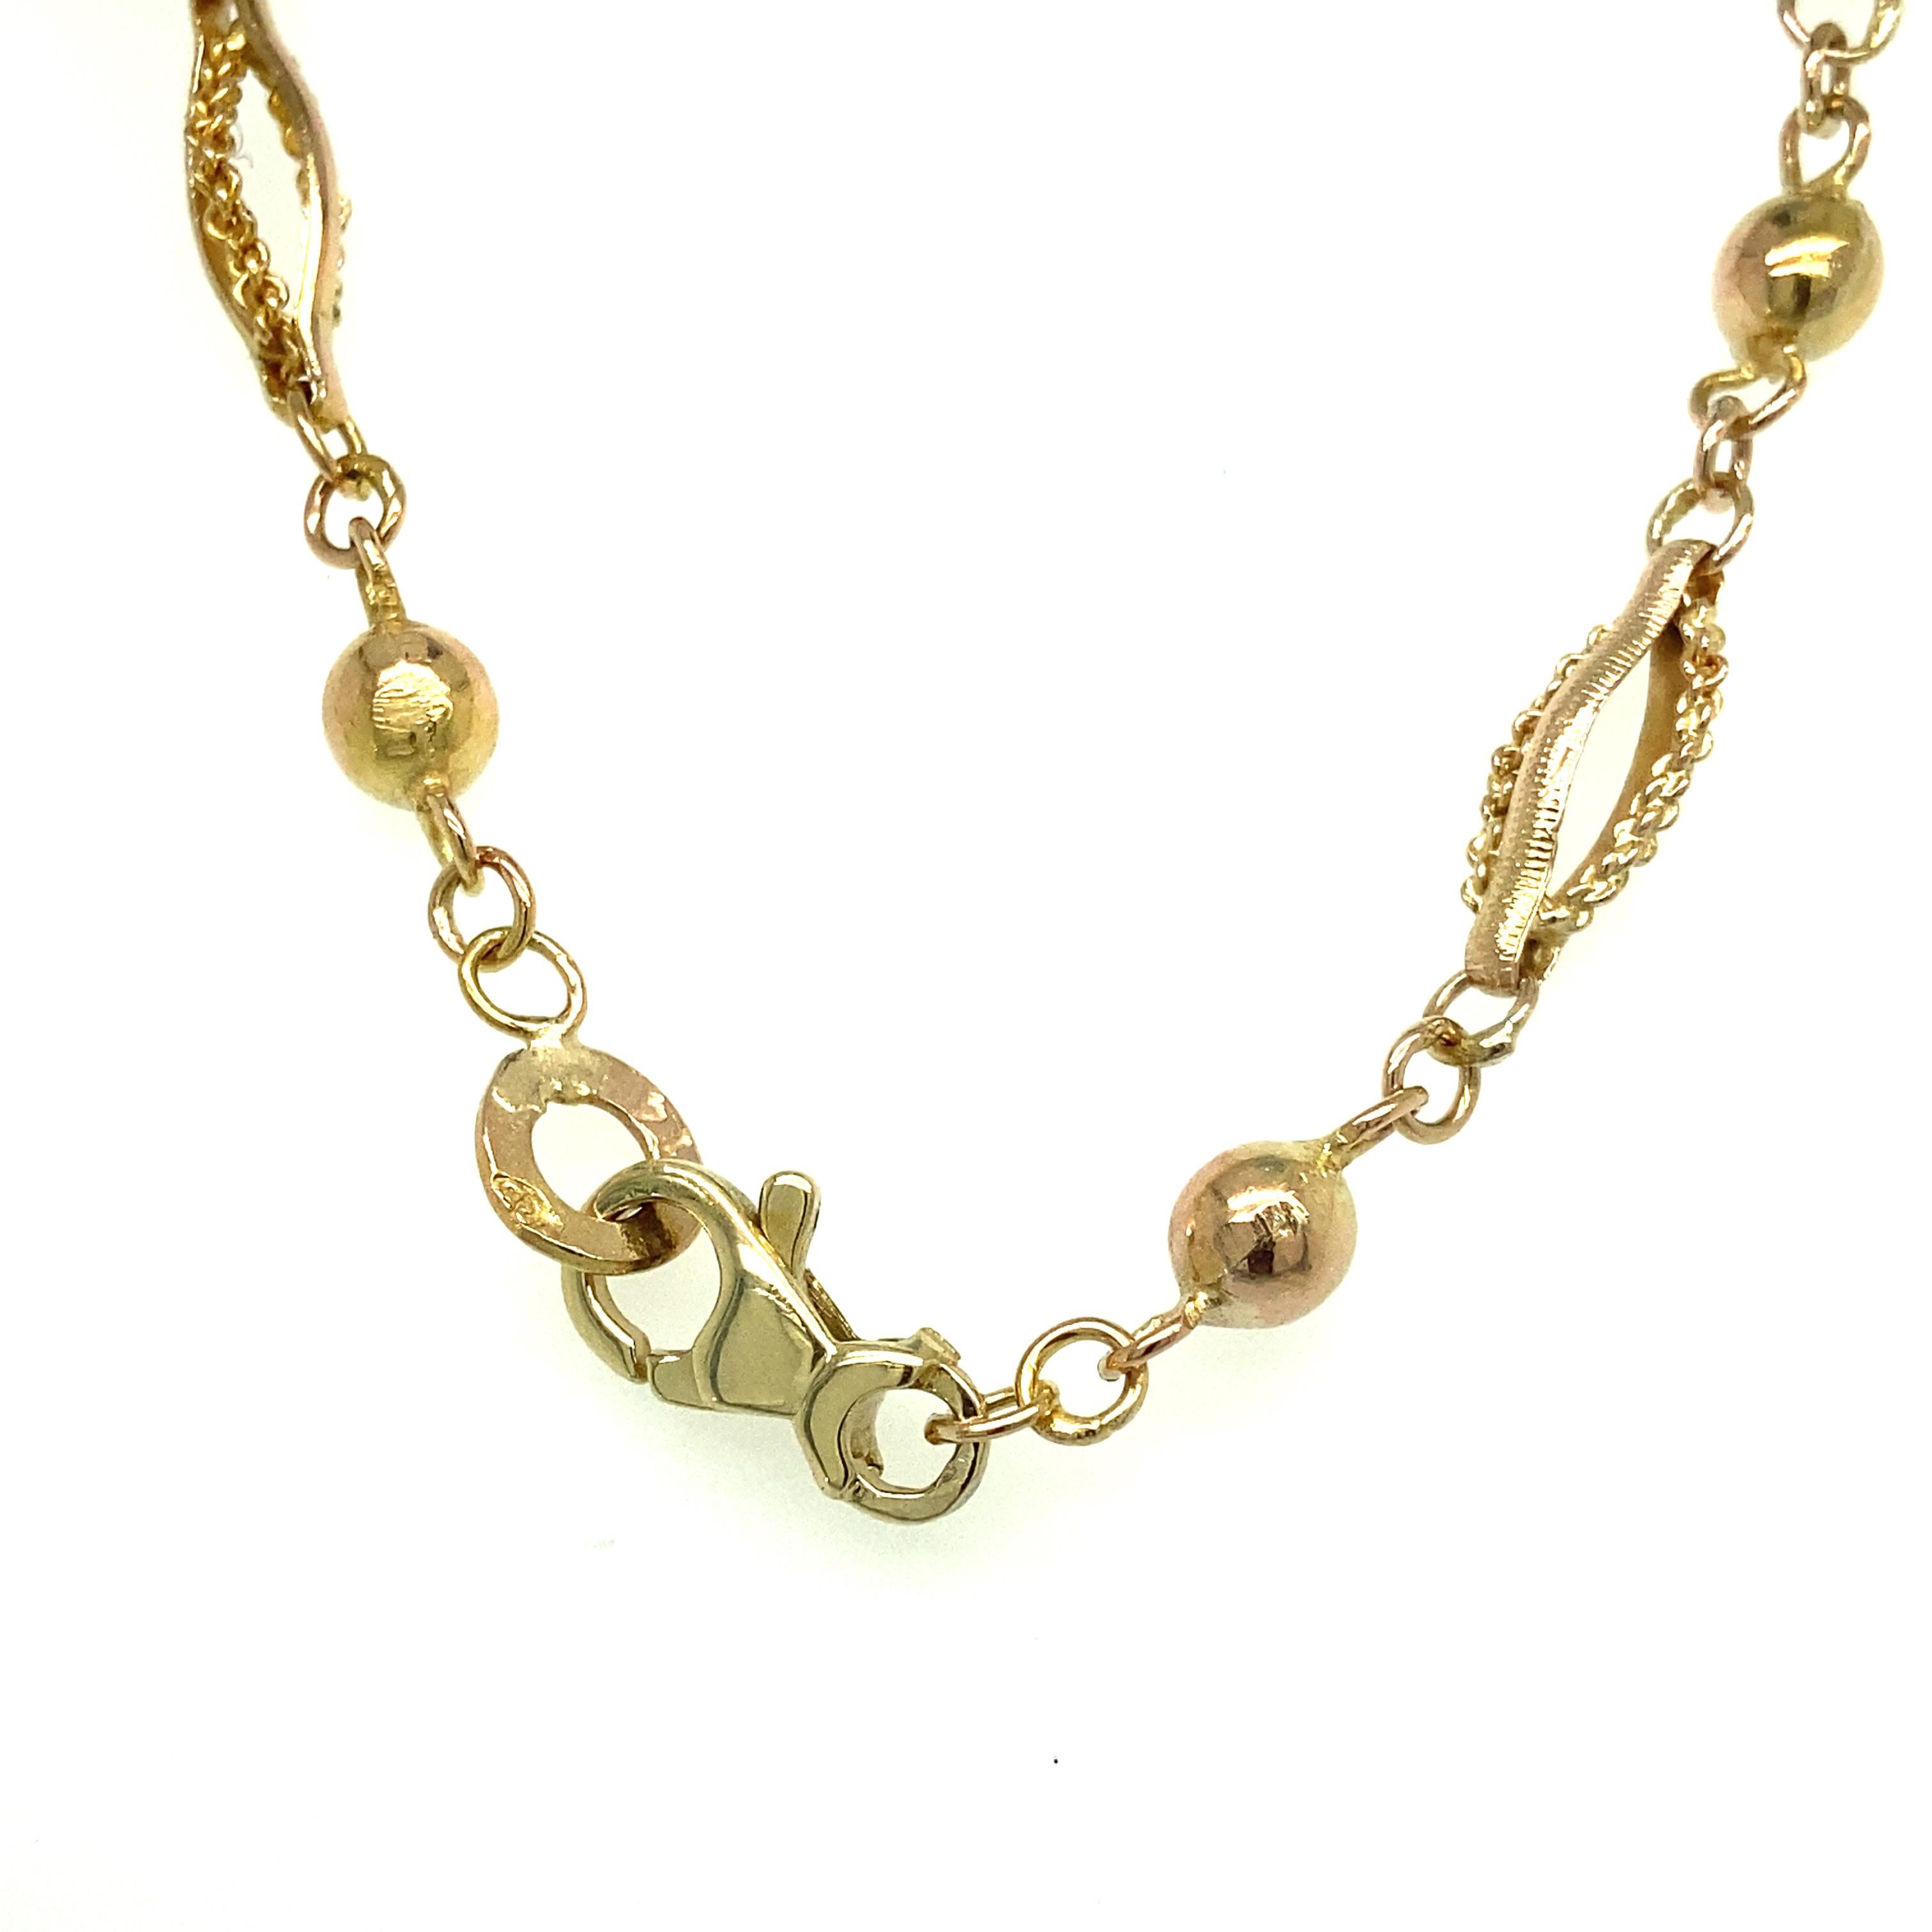 One 14 karat yellow gold estate necklace measuring 30 inches long complete with a lobster claw clasp.